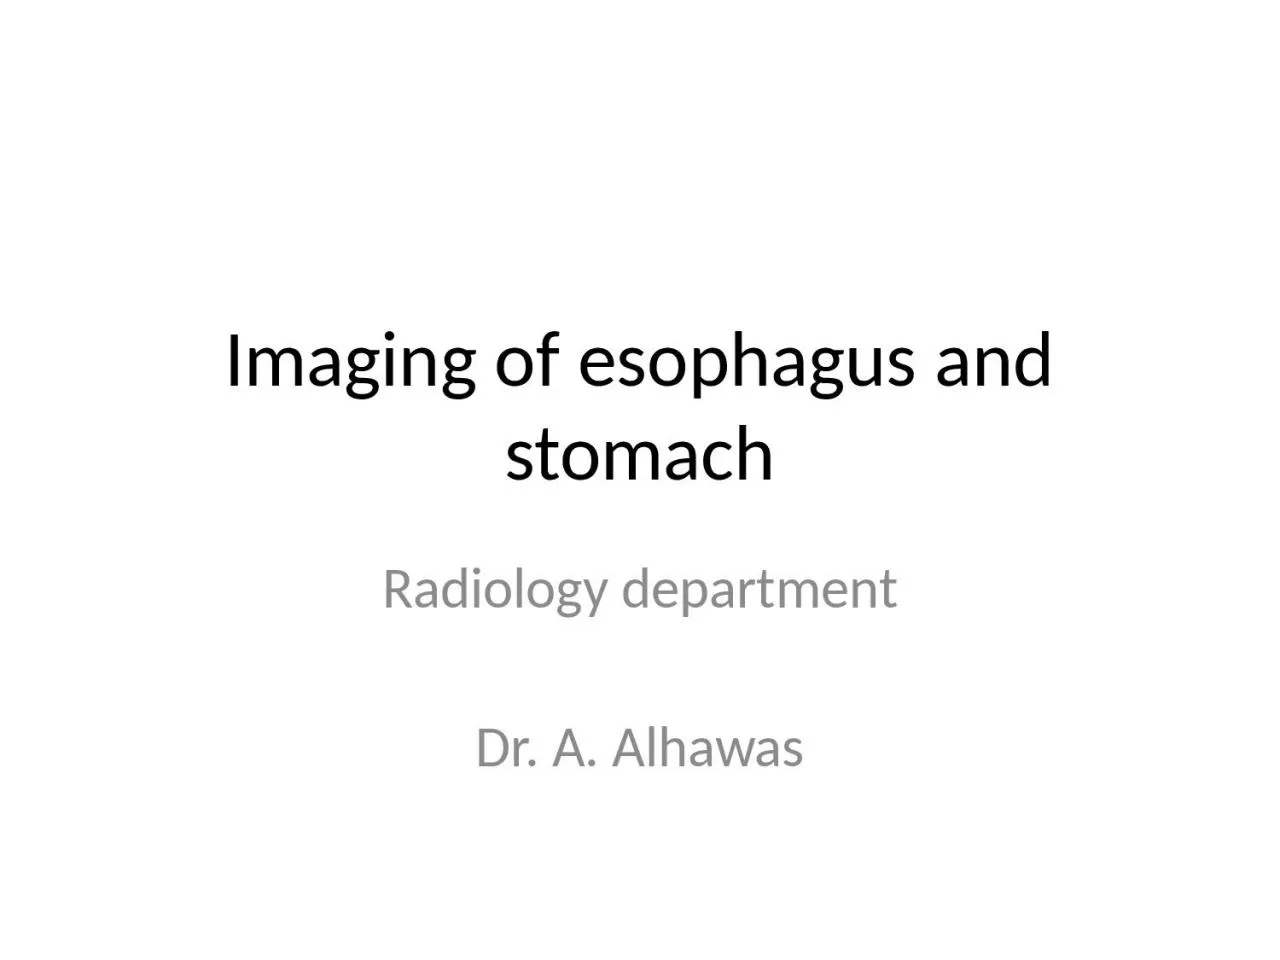 Imaging of esophagus and stomach